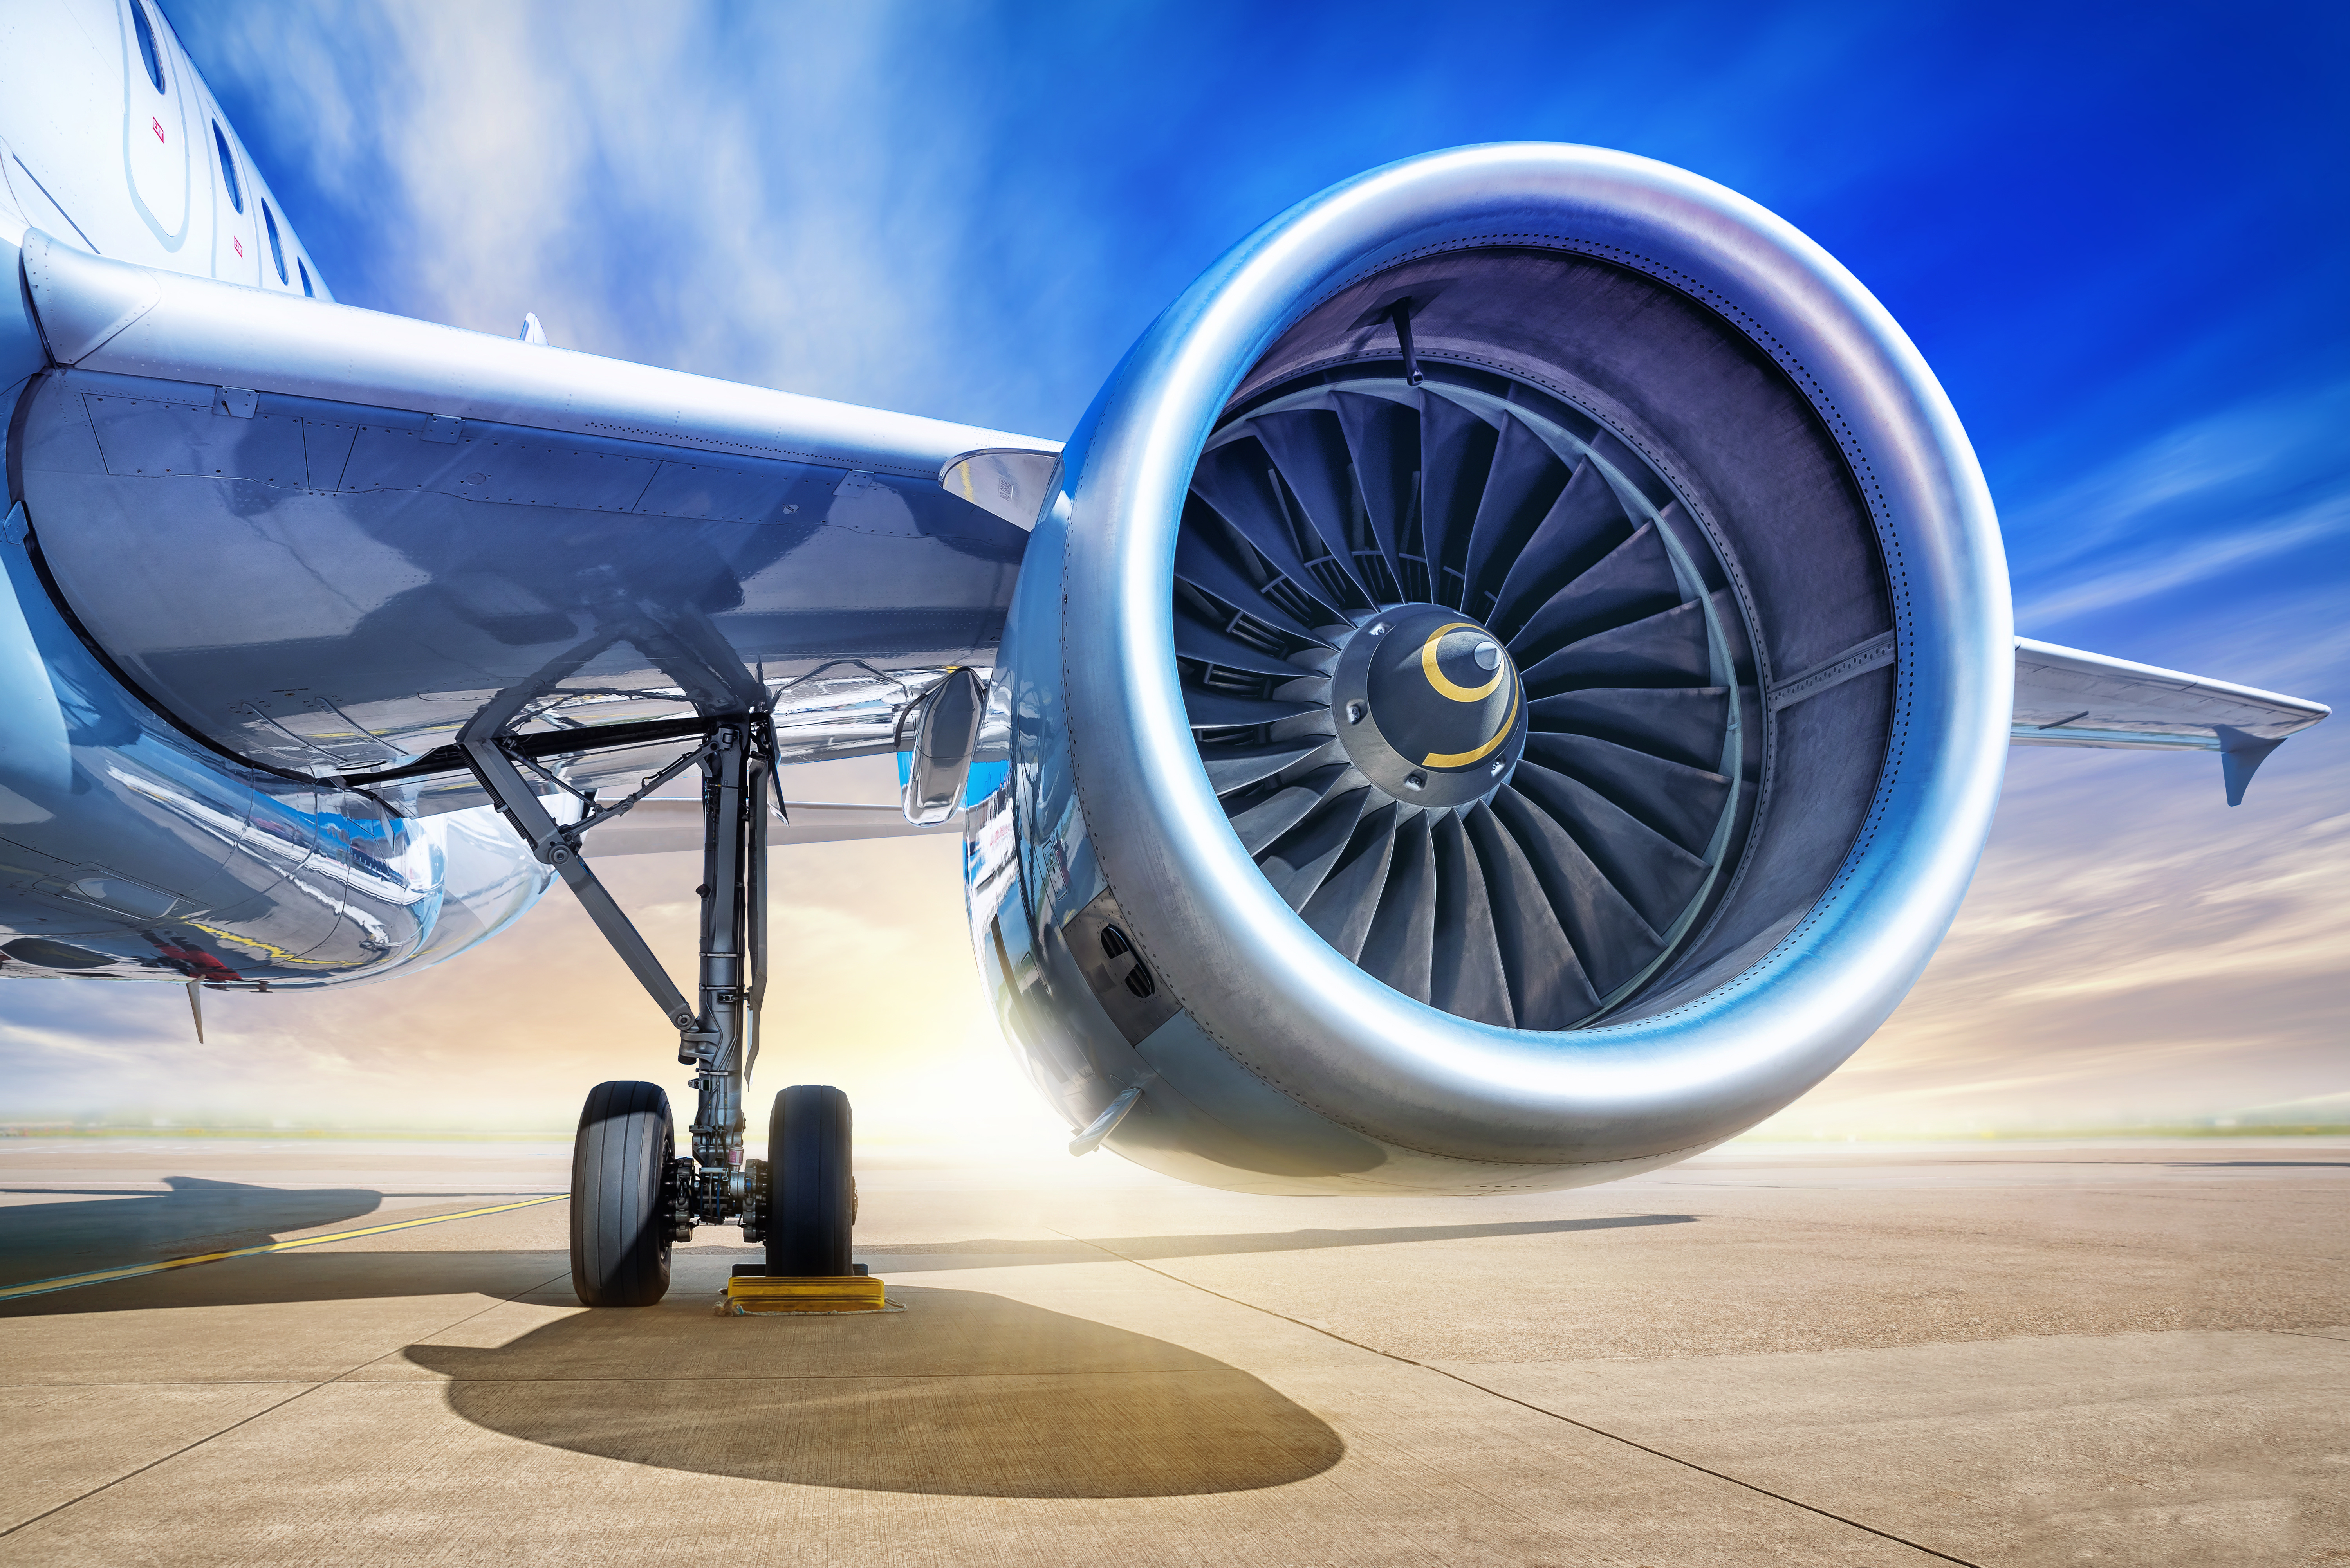 Provide optimal support for your aircraft’s main engine